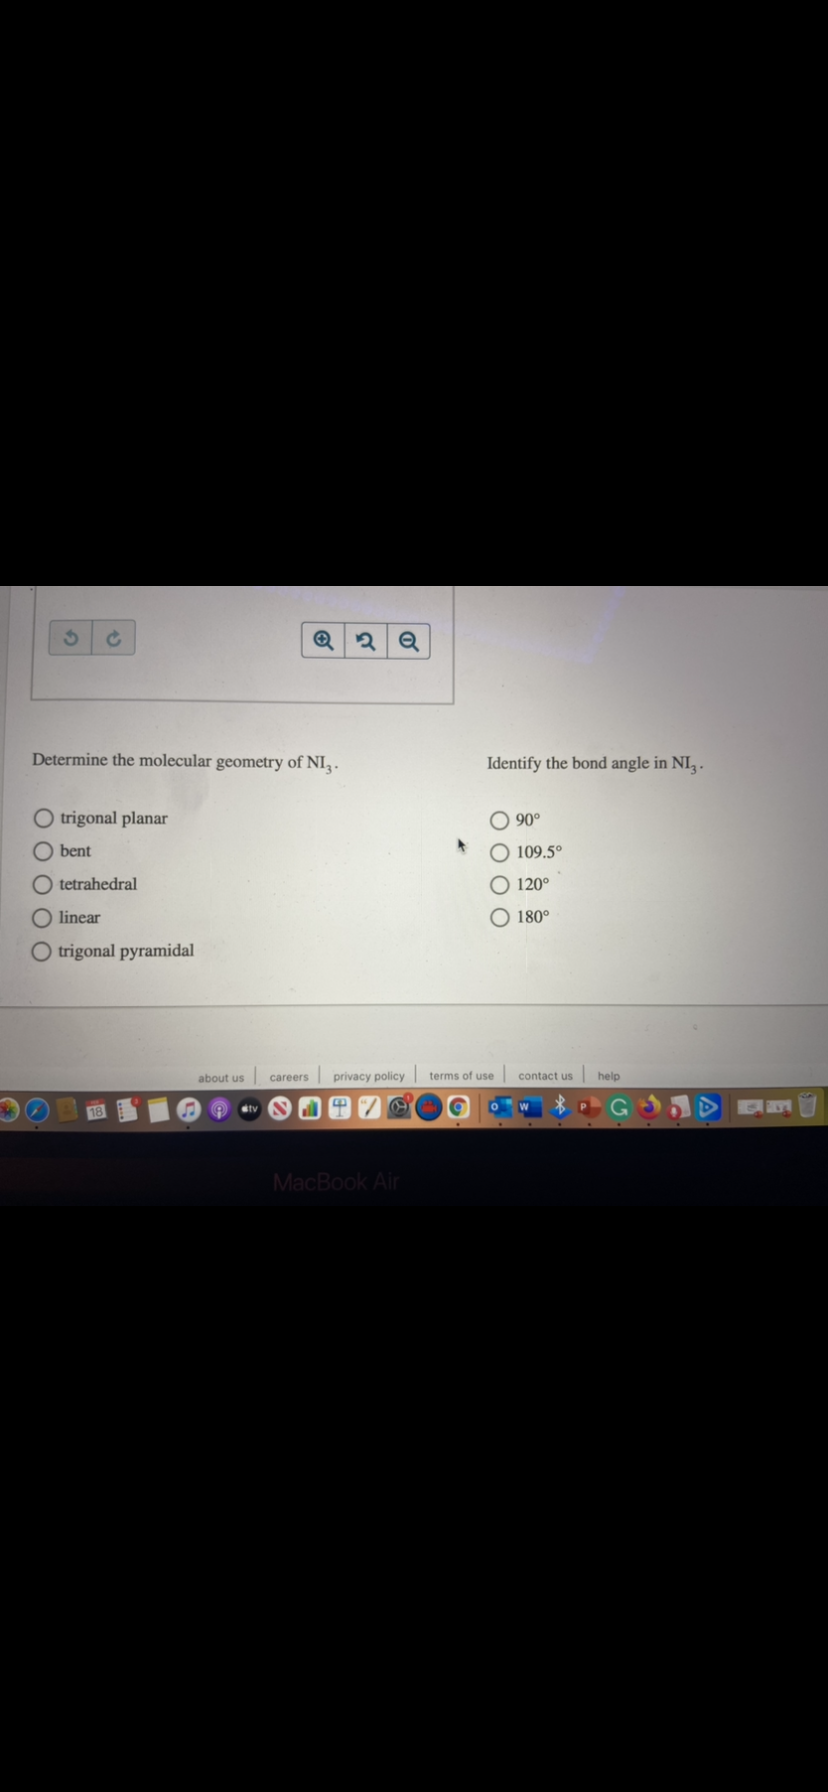 Determine the molecular geometry of NI, .
Identify the bond angle in NI .
O trigonal planar
90°
bent
O 109.5°
tetrahedral
O 120°
O linear
O 180°
O trigonal pyramidal
about us
careers privacy policy
terms of use
contact us
help
stv
MacBook Air
